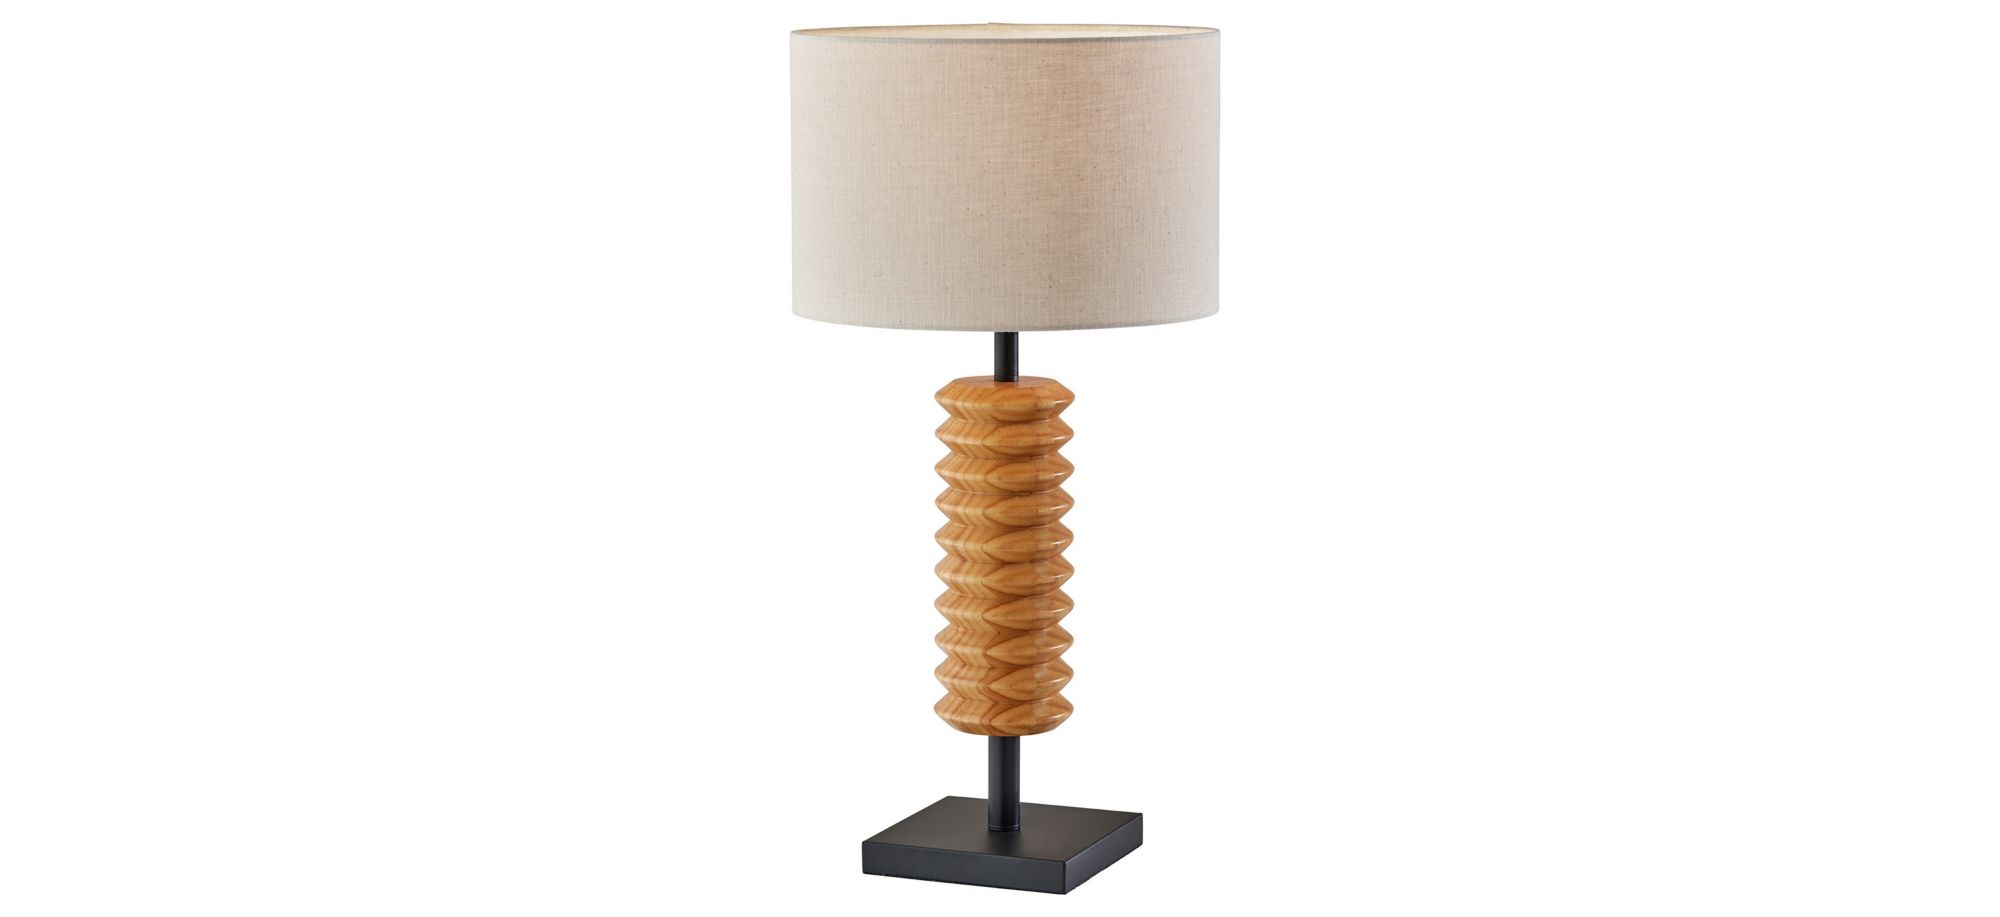 Judith Table Lamp in Black by Adesso Inc